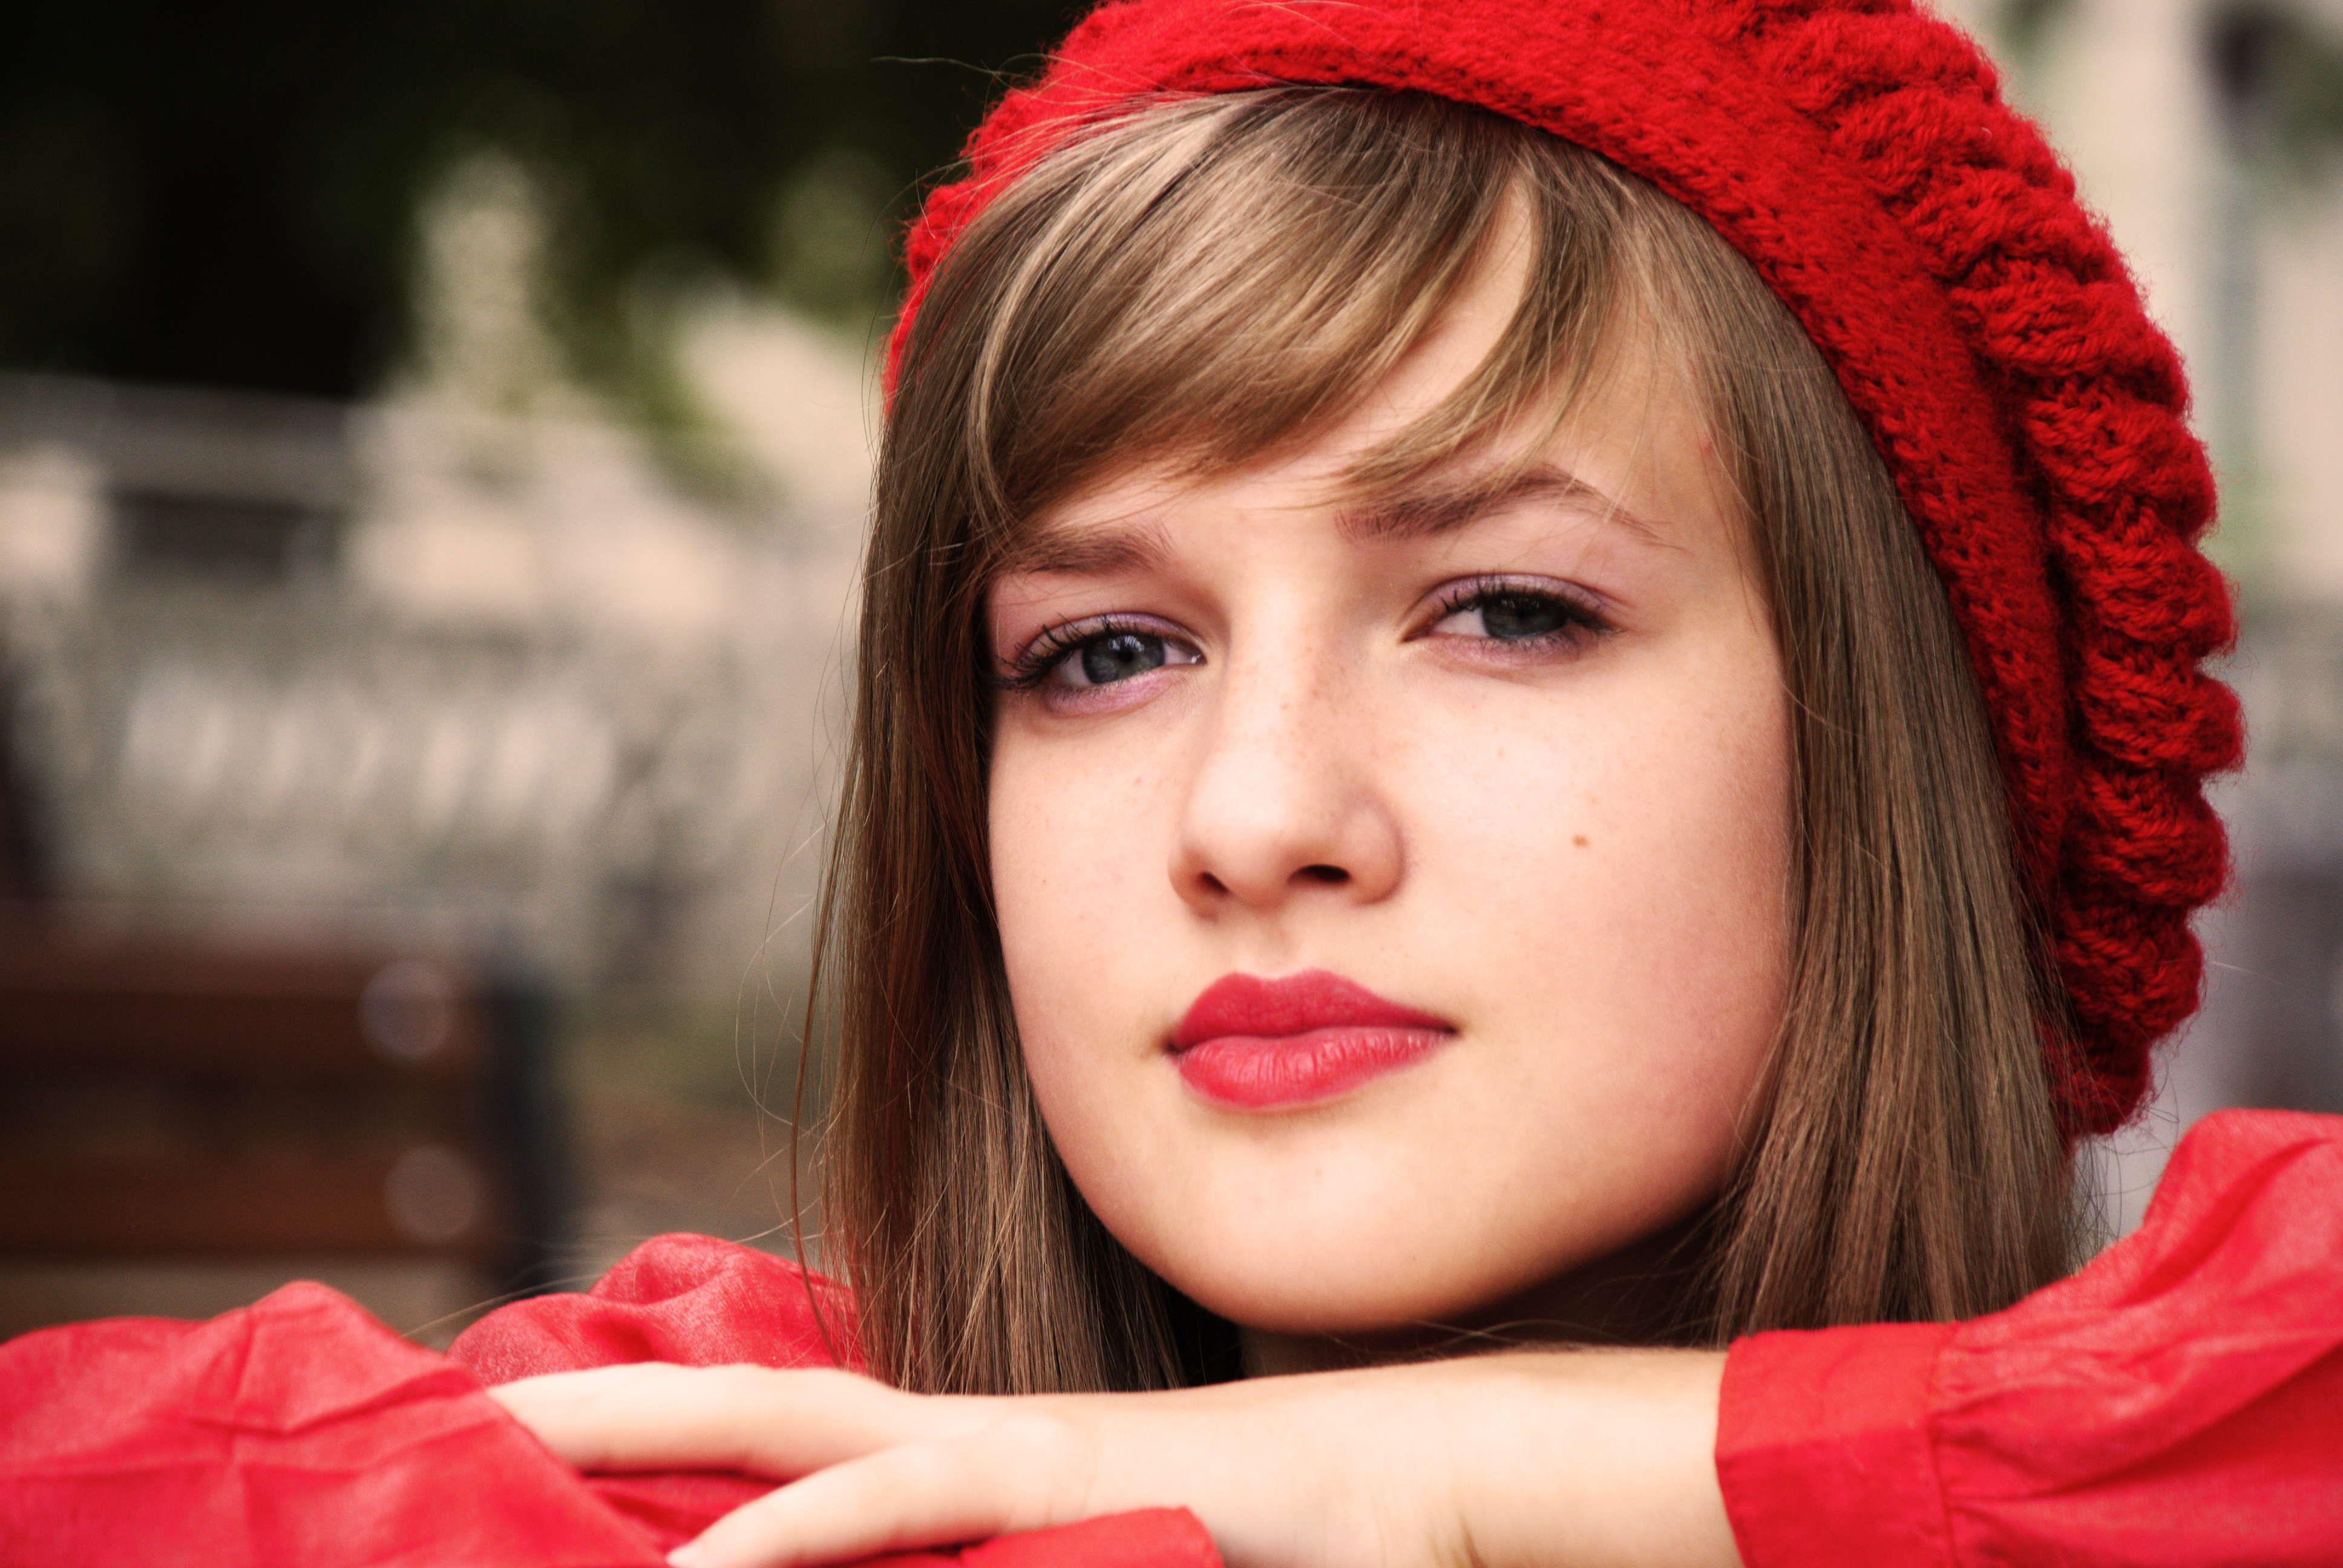 kaylee, Defer, Face, Glance, Red, Lips, Brown, Haired, Winter, Hat, Celebrities, Girls Wallpaper